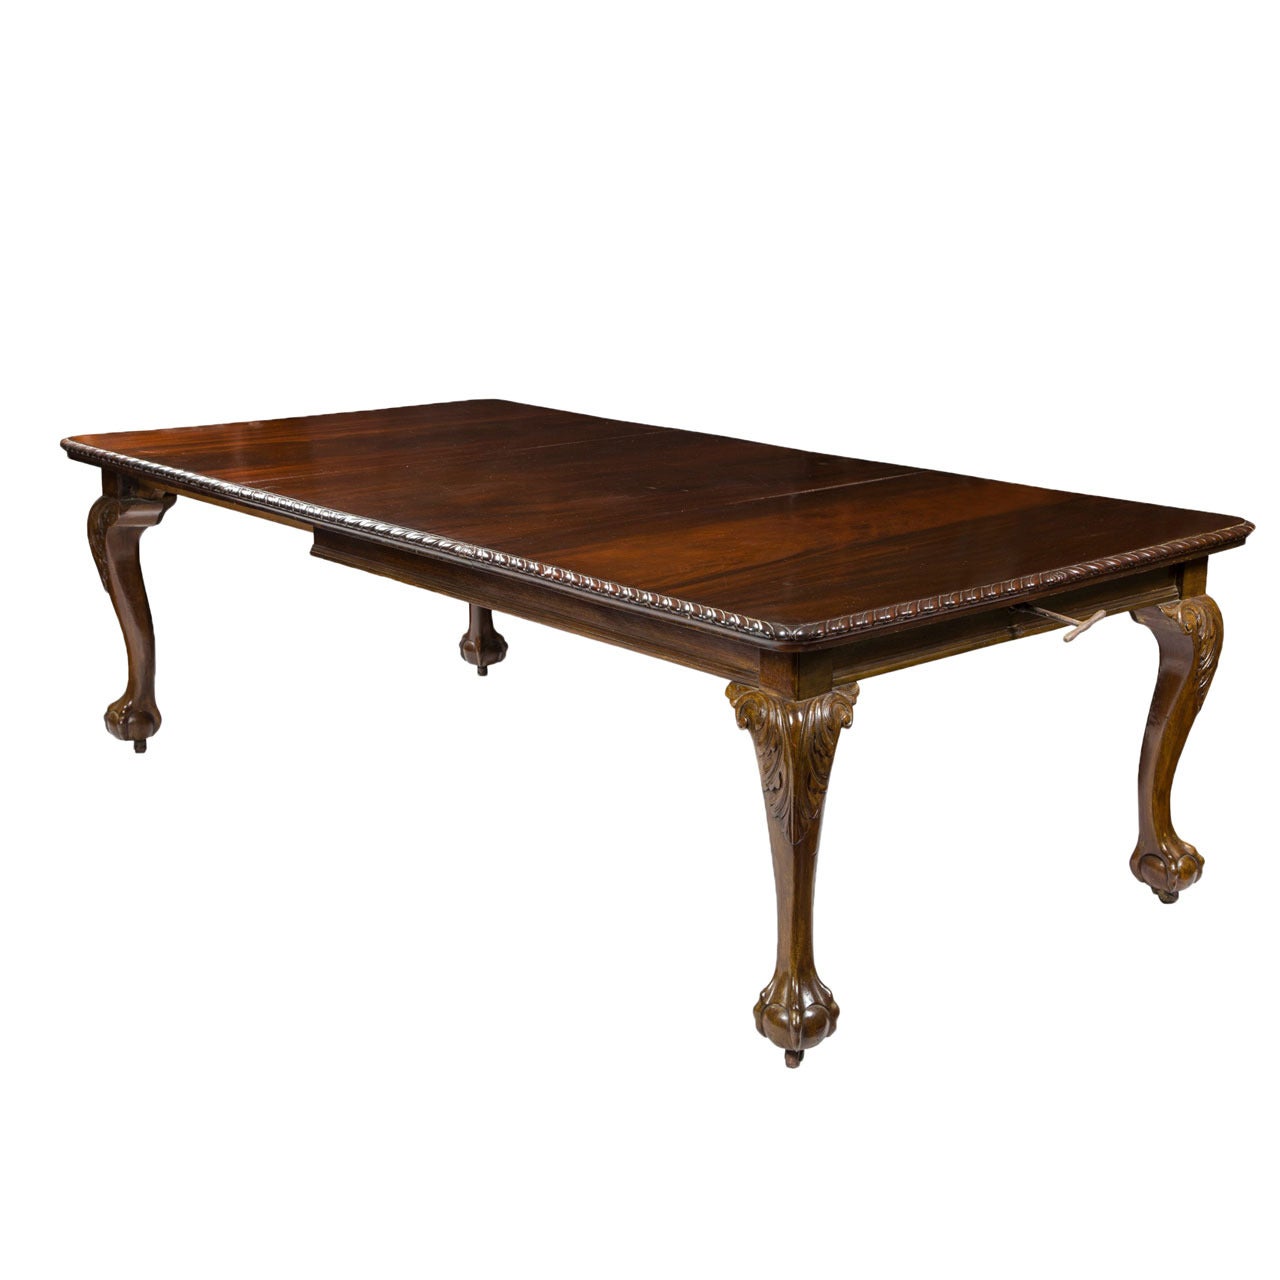 Mahogany Chippendale Style Dining Room Table, Late 19th Century